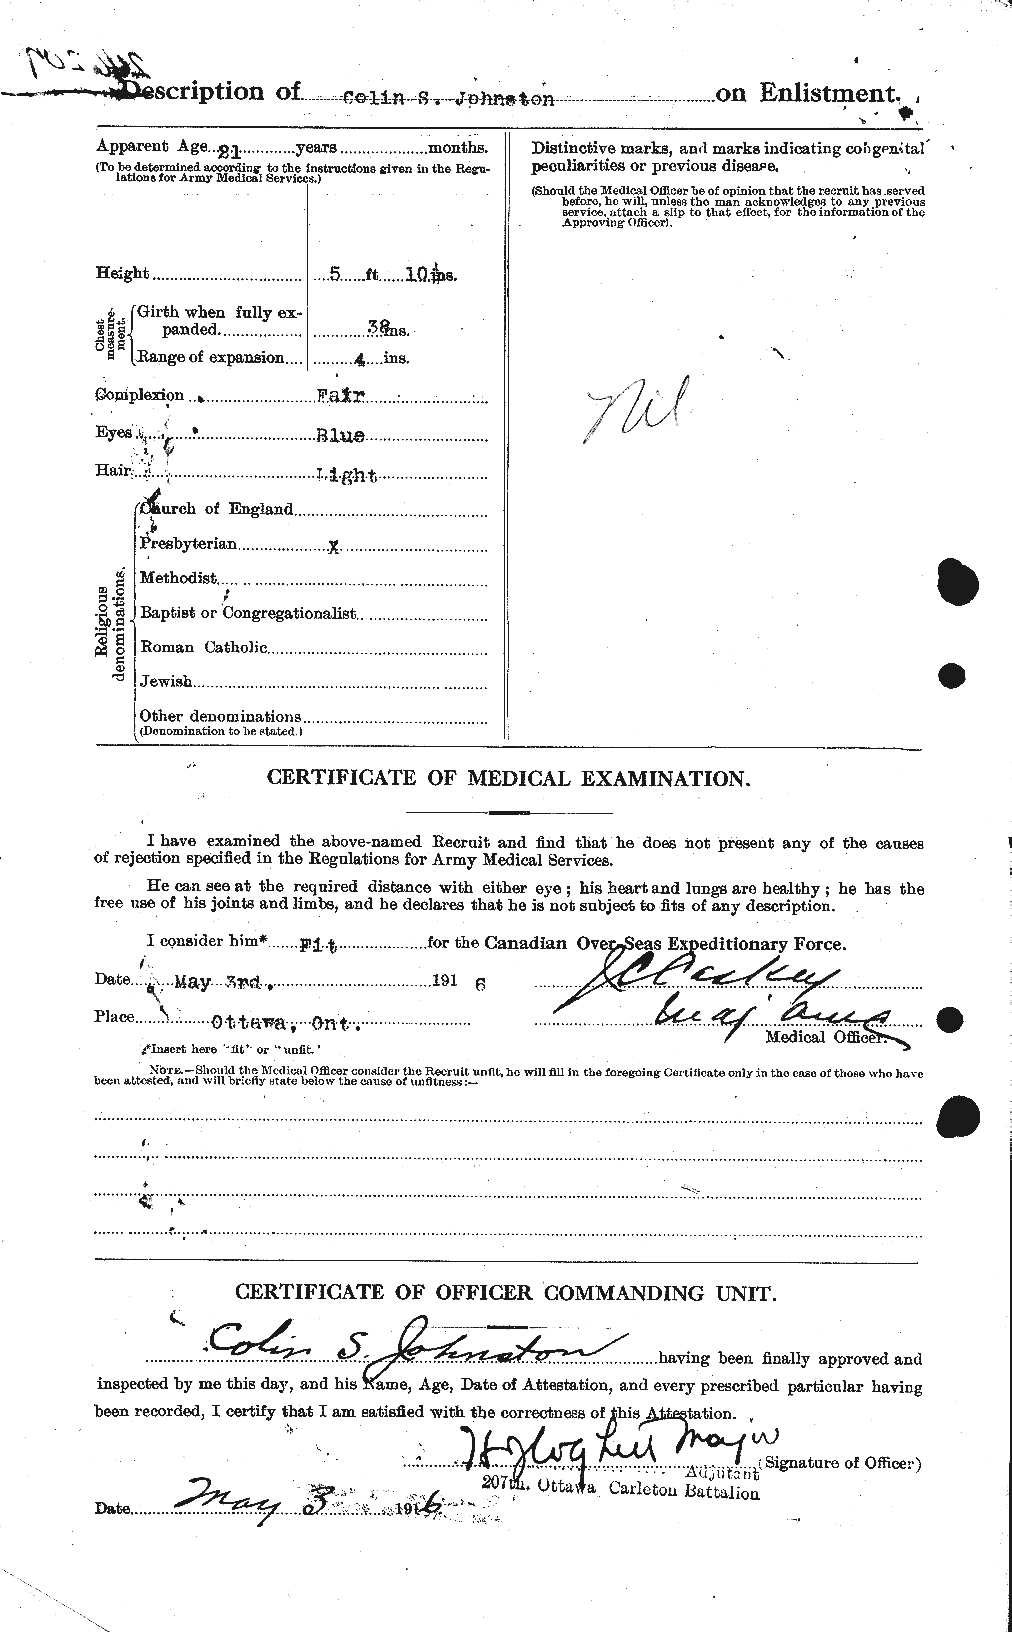 Personnel Records of the First World War - CEF 423145b